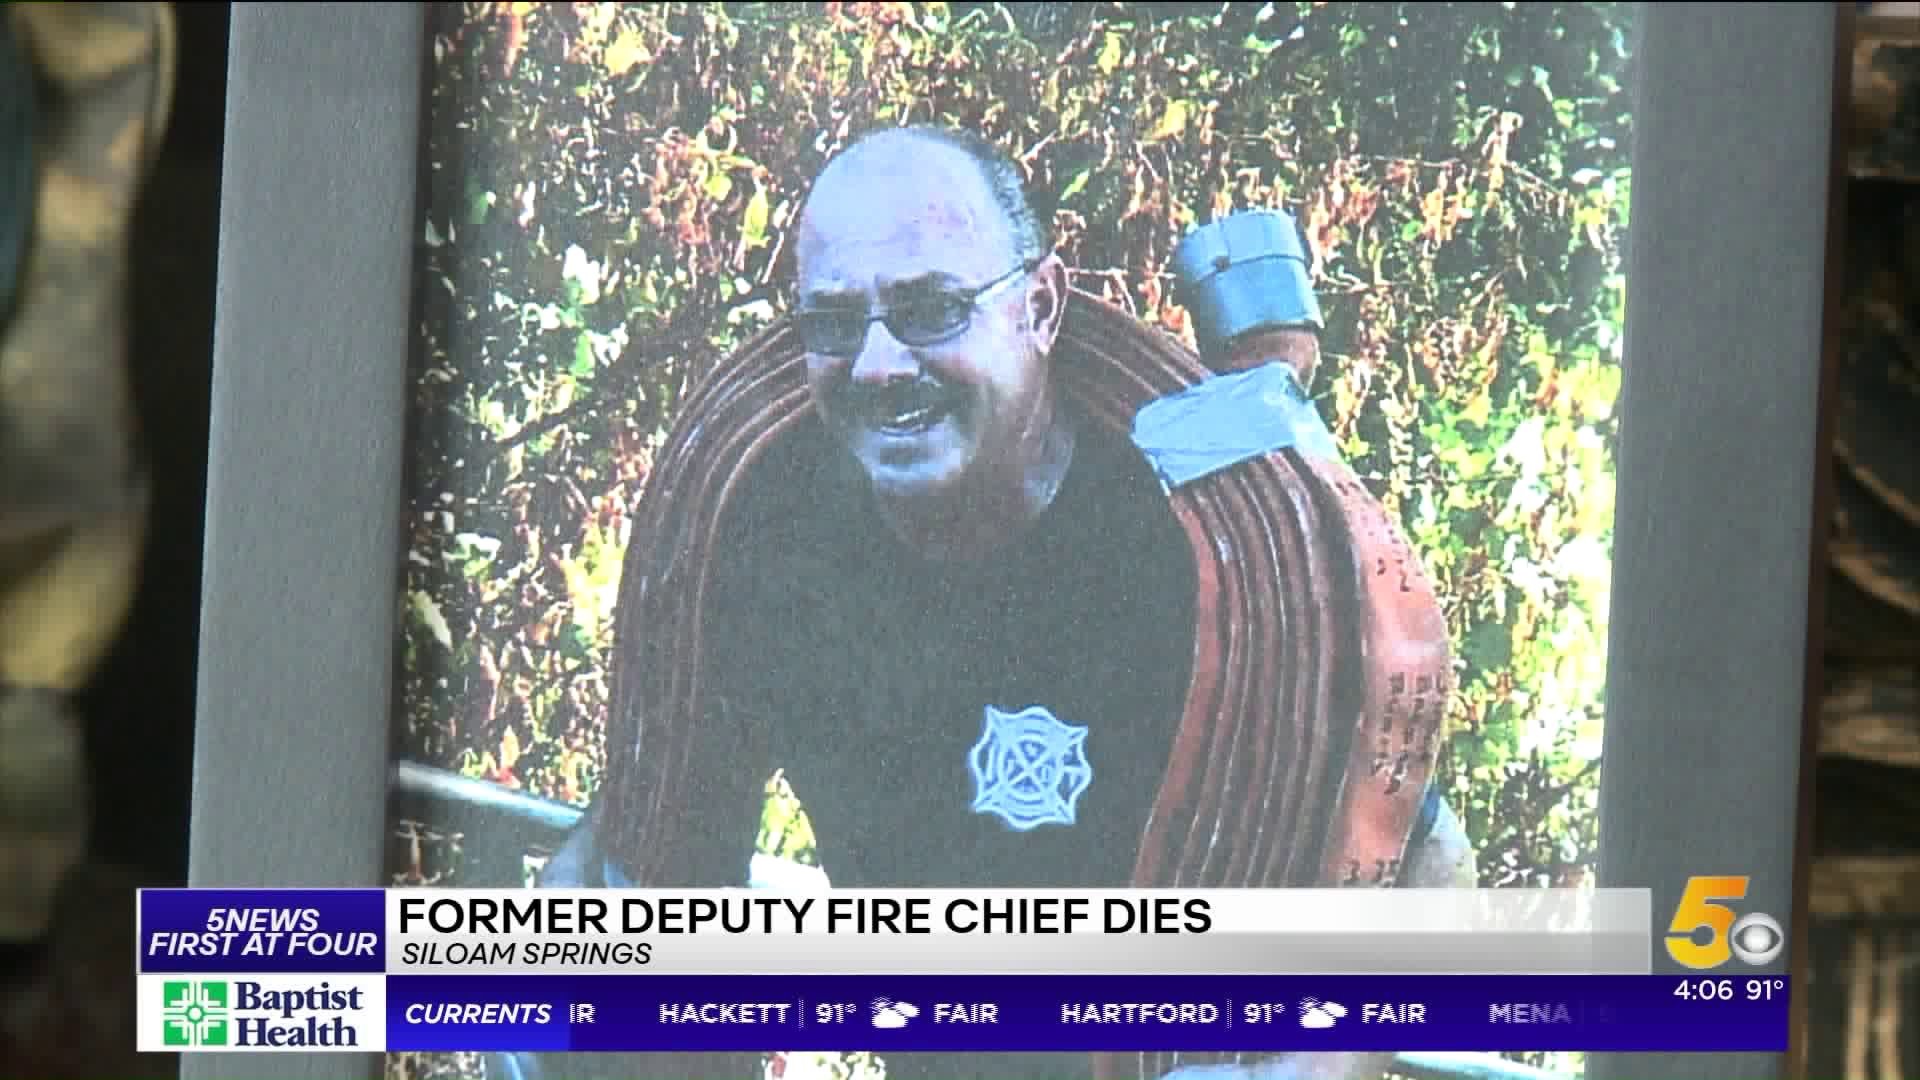 Retired Deputy Fire Chief Of Siloam Springs Dies While On Annual Bike Ride